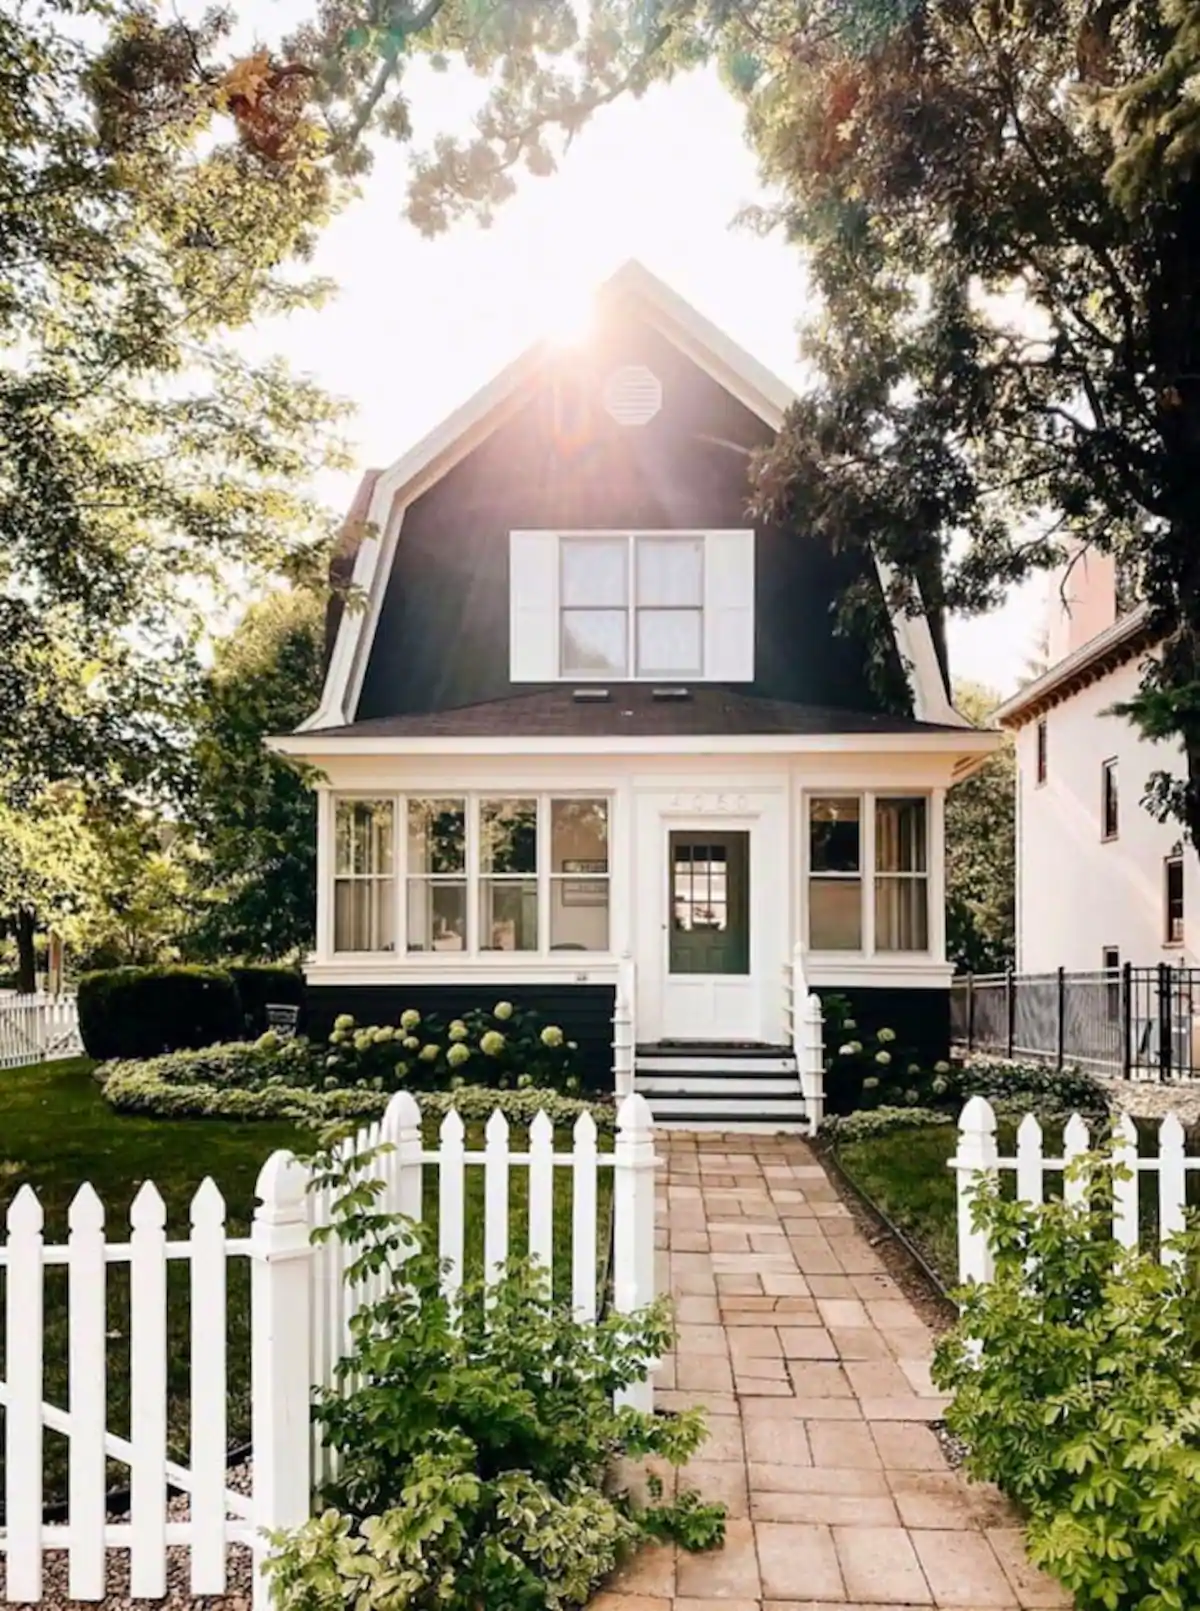 Sun peeking over the roof of a charming Airbnb in Minneapolis with dark exterior, white picket fence in front of it with charming walkway.